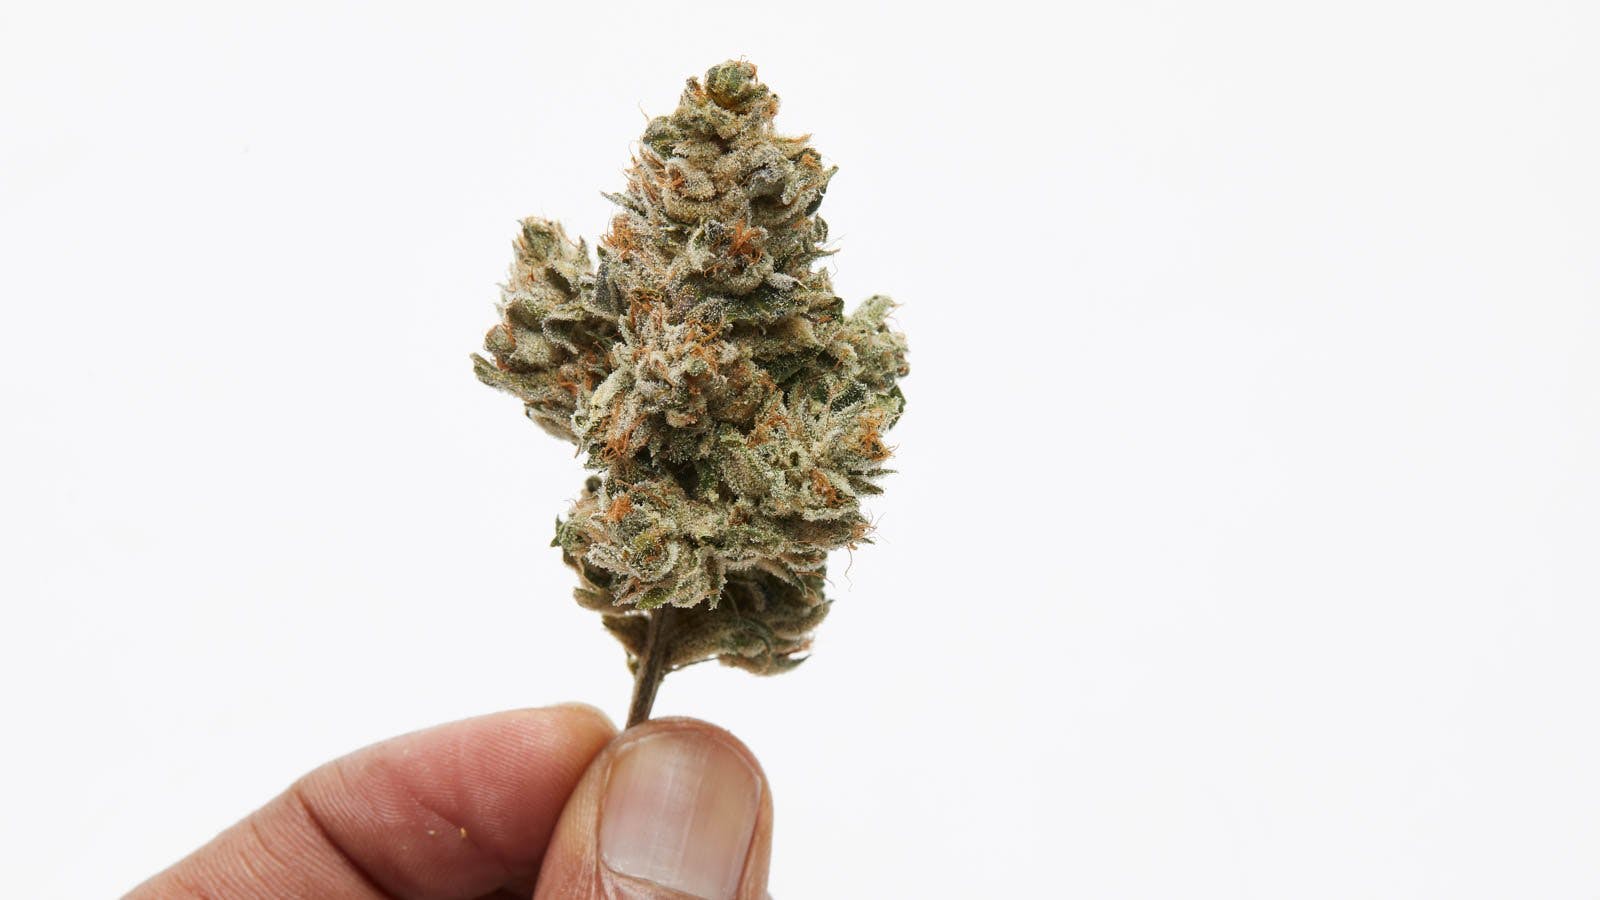 What is cannabis flower and how do you consume it?